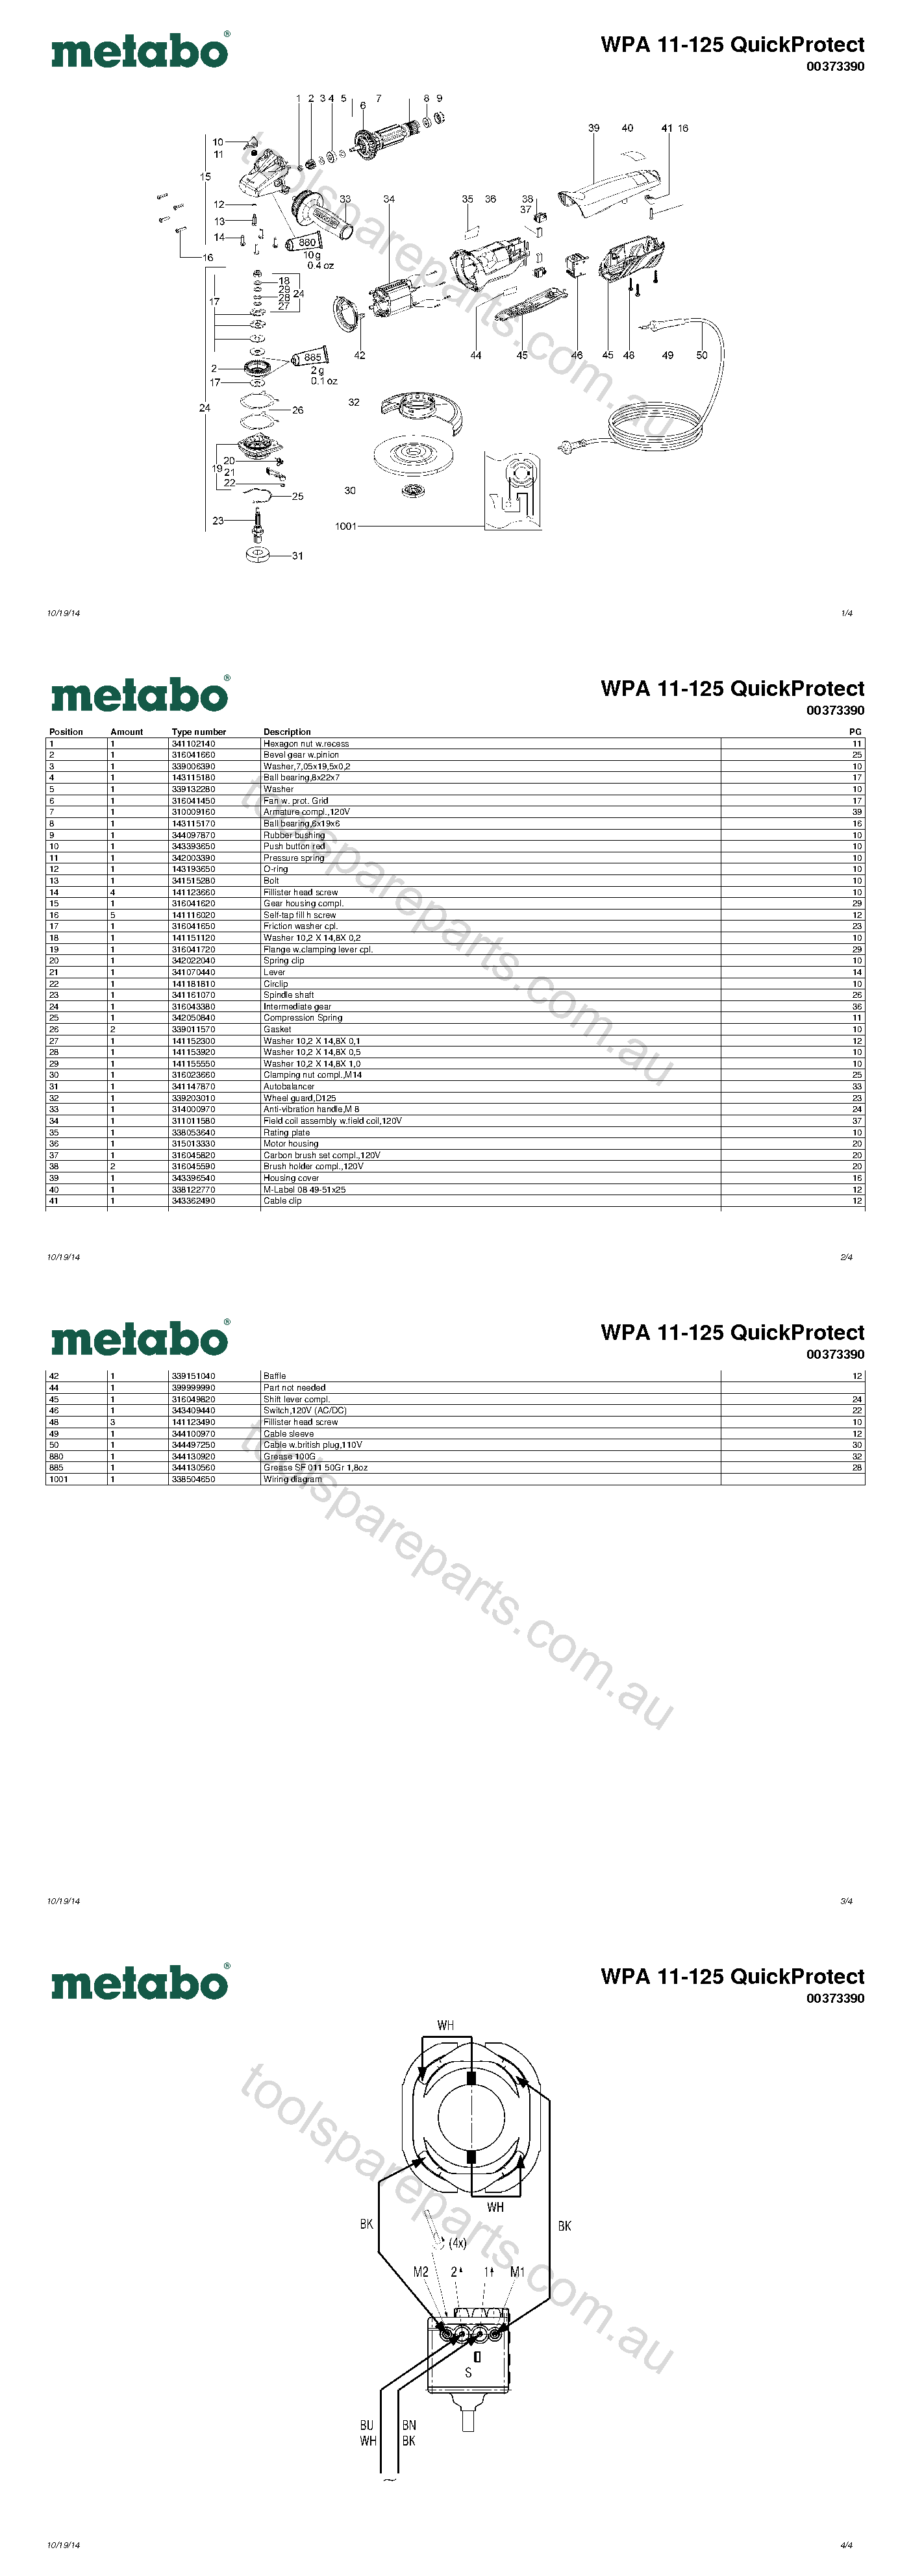 Metabo WPA 11-125 QuickProtect 00373390  Diagram 1